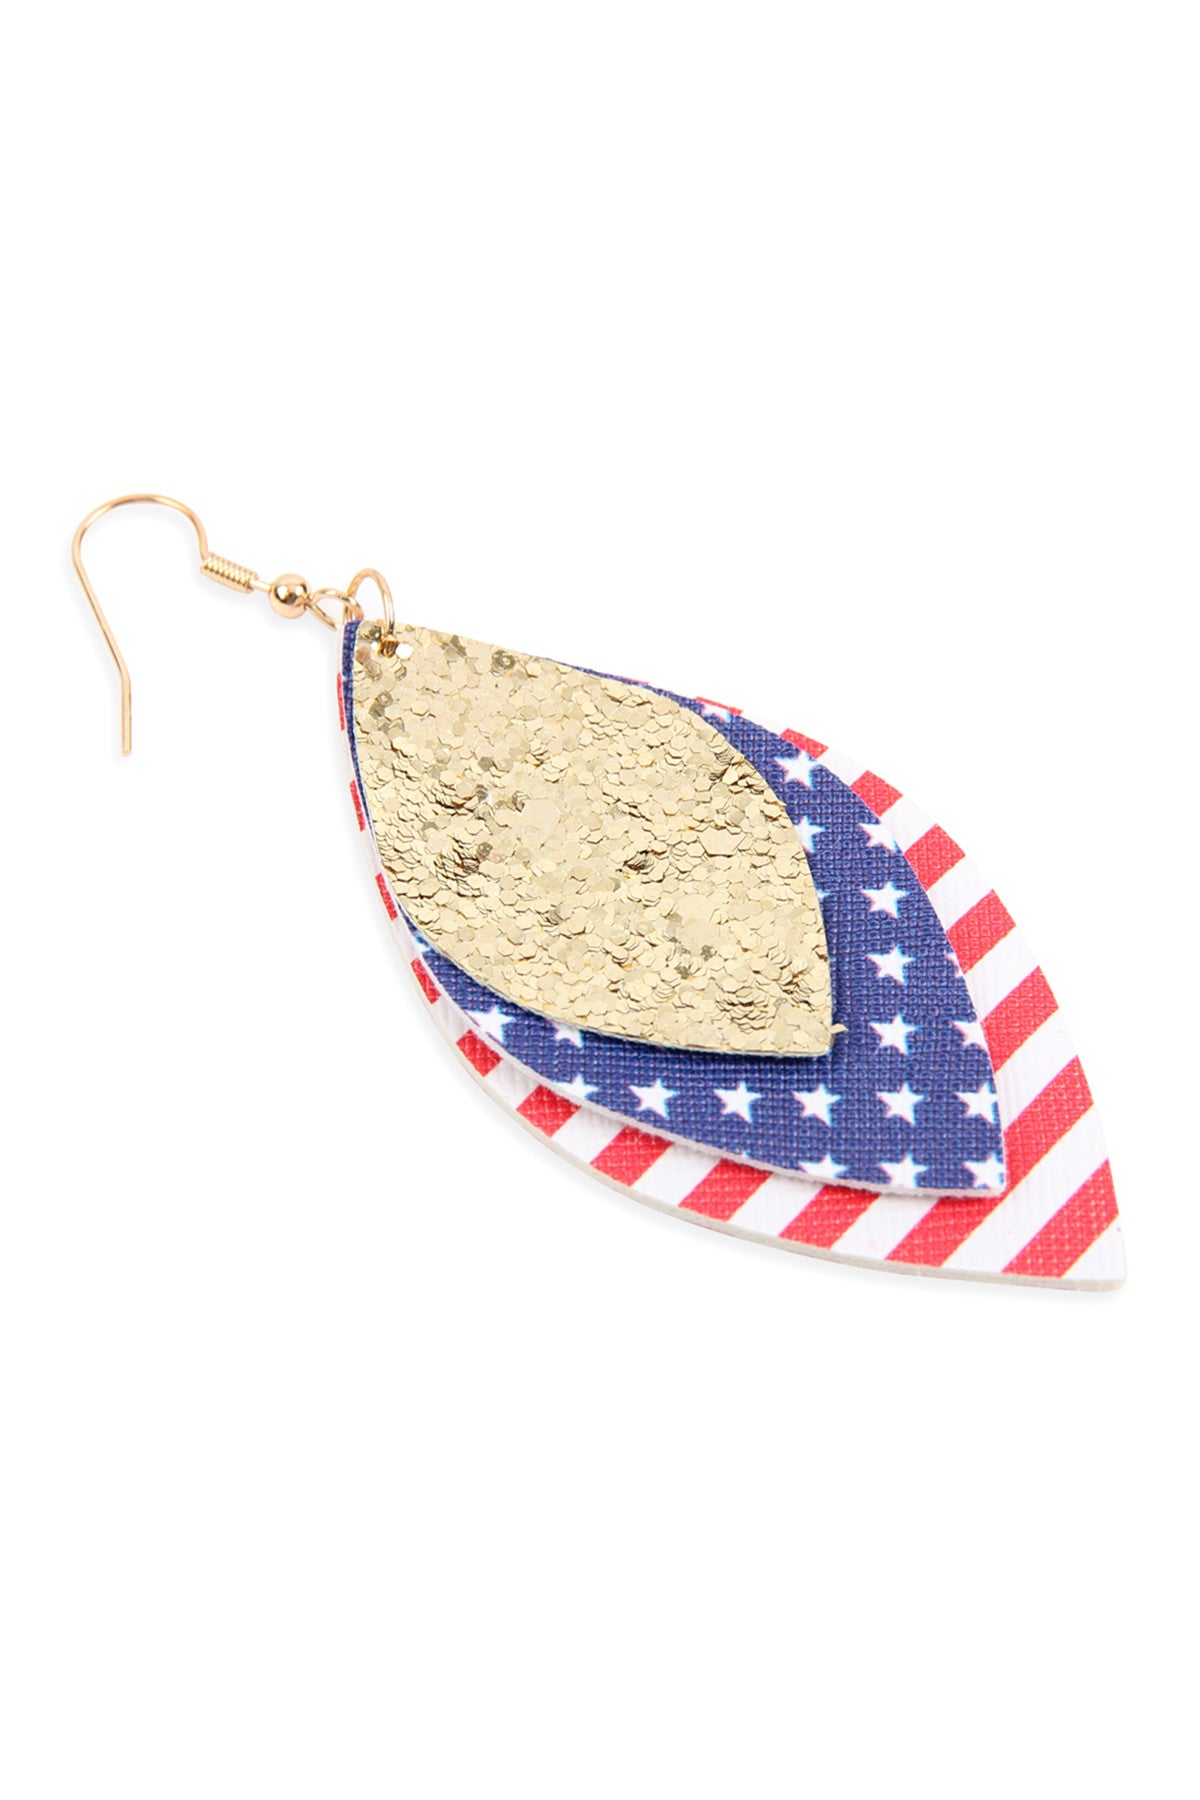 USA FLAG WITH SEQUIN MARQUISE LAYERED LEATHER DROP EARRINGS/6PAIRS